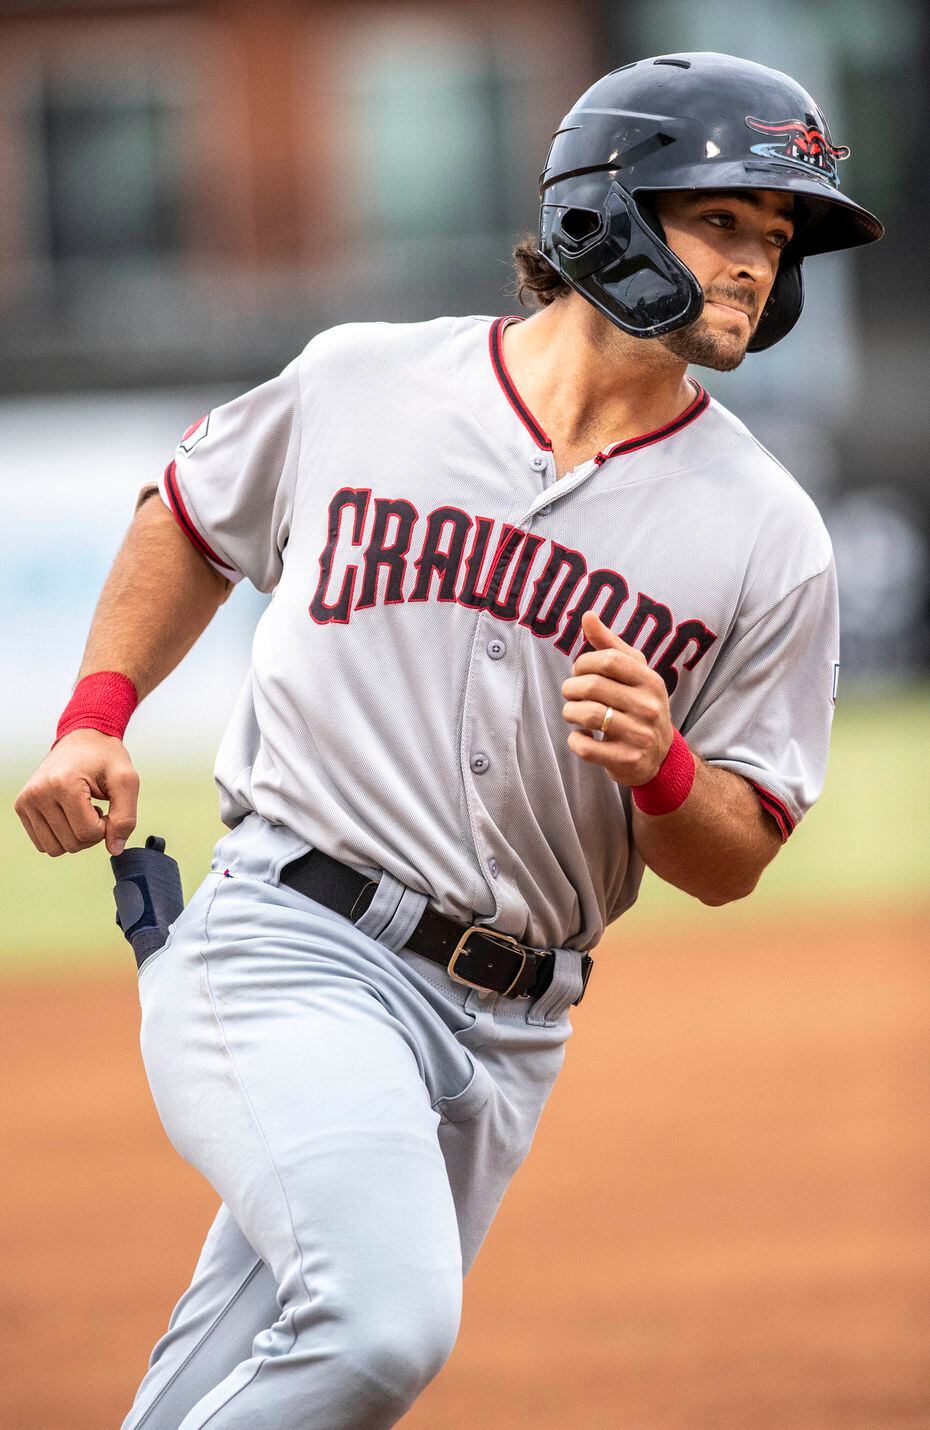 Hickory Crawdad's Josh H. Smith (12) jogs around the bases after hitting a homerun at his first at bat during the game with the Greensboro Grasshopper's at First National Bank Field on Friday, August 6, 2021 in Greensboro, N.C. (Woody Marshall/Special Contributor)